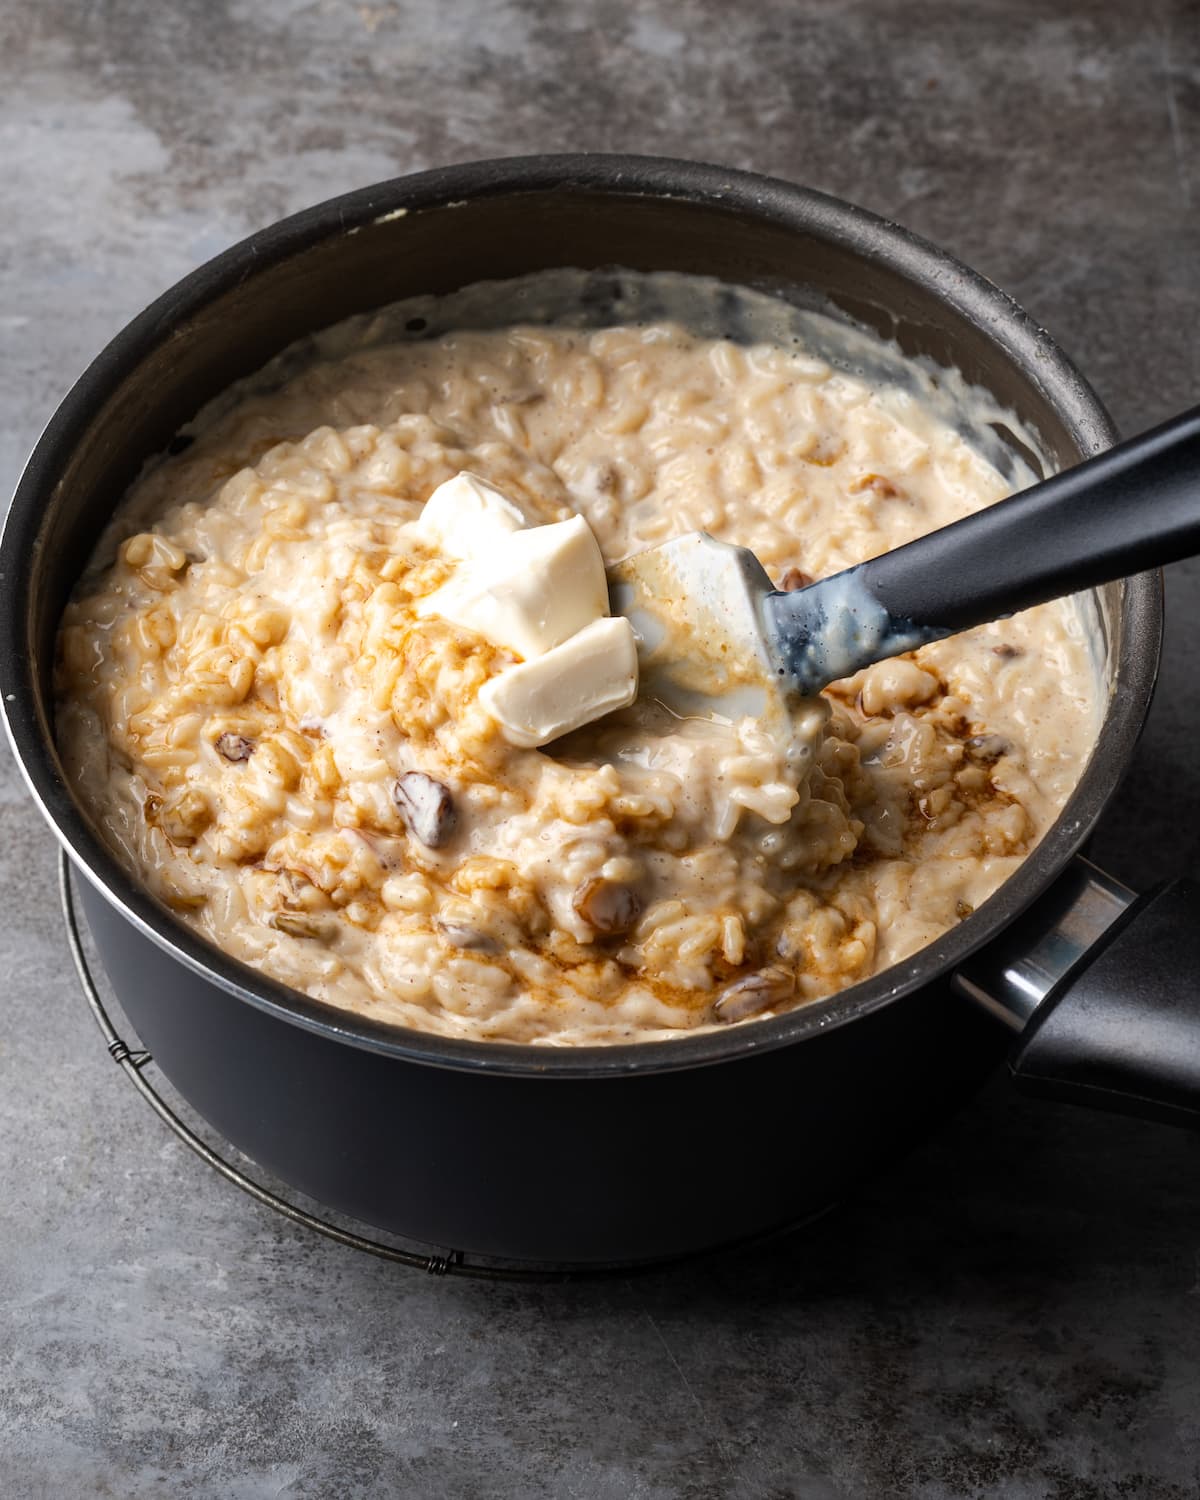 Butter cubes and vanilla extract are stirred into a saucepan filled with rice pudding.